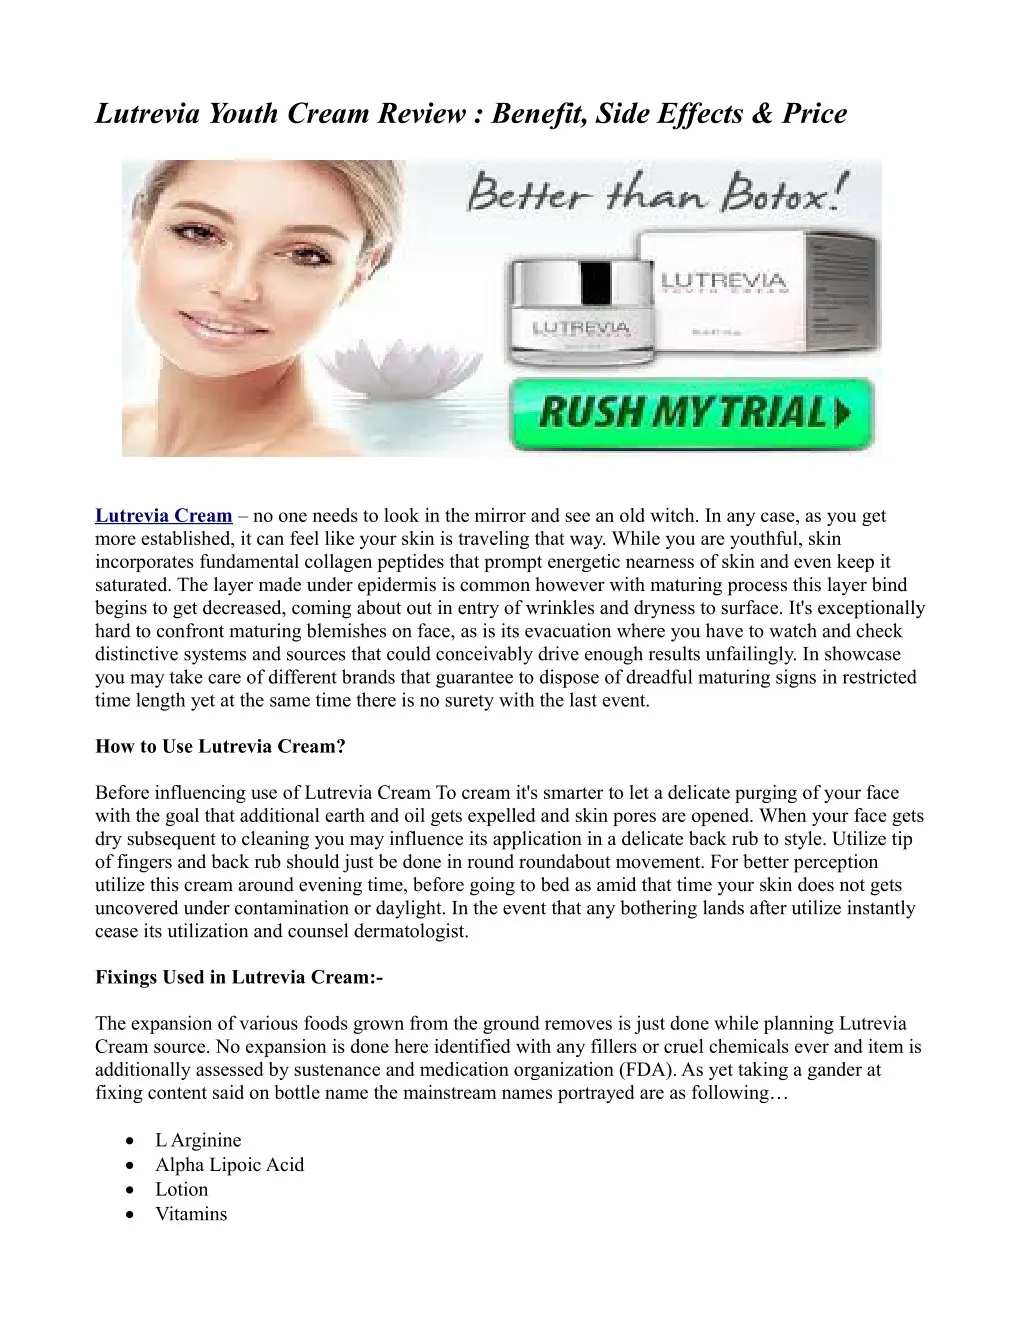 lutrevia youth cream review benefit side effects